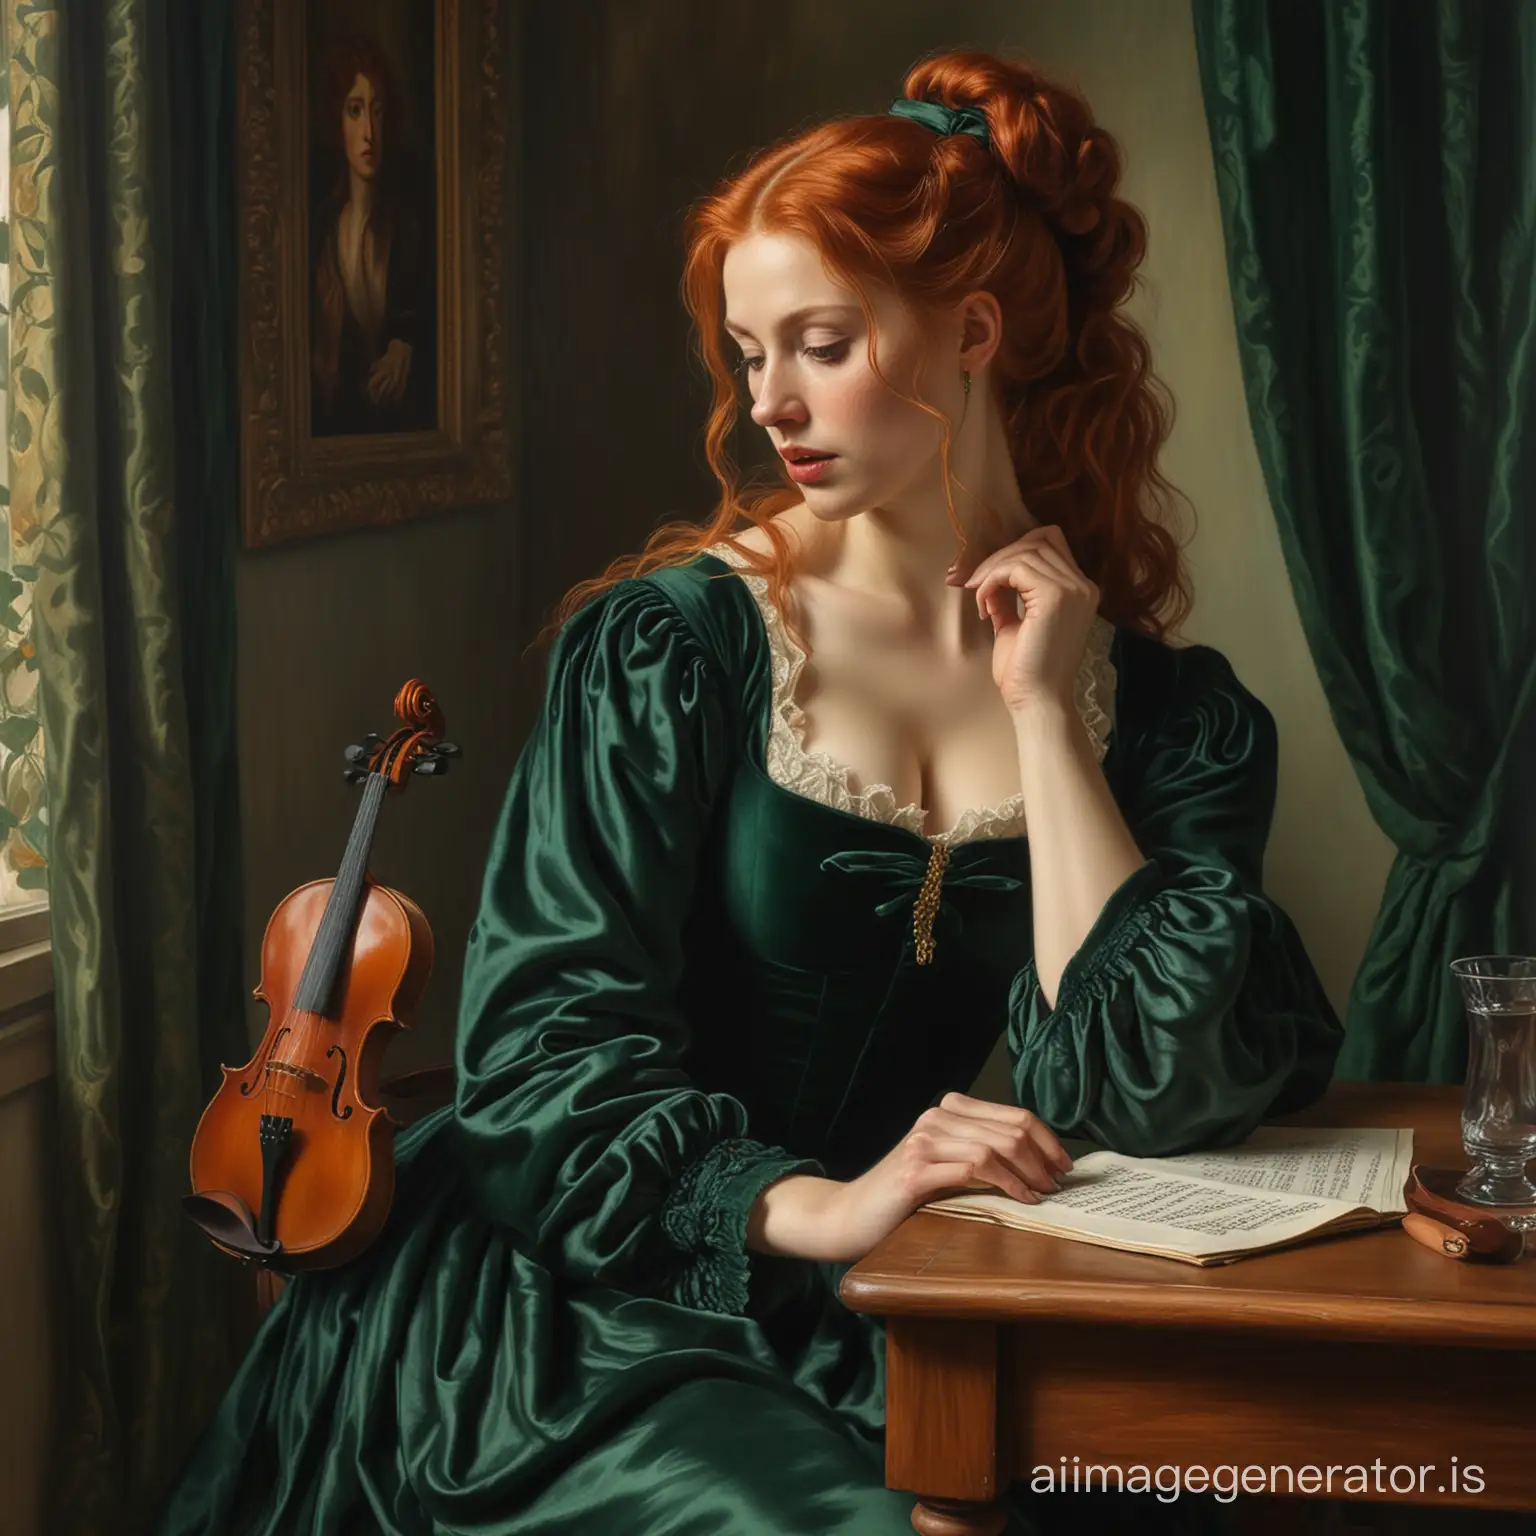 A masterpiece in the Pre-Raphaelite style, a large red-haired bored woman of about 40 with large facial features, thick lips, hair tied at the back of her head, in a dark green velvet dress sits at a small table, in profile, a violin hangs on the wall in front of her, the woman touches the violin with her fingers , dark green velvet curtain in the background, sophisticated dramatic lighting, oil on canvas, brush strokes, masterpiece in the style of Dante Gabriel Rossetti